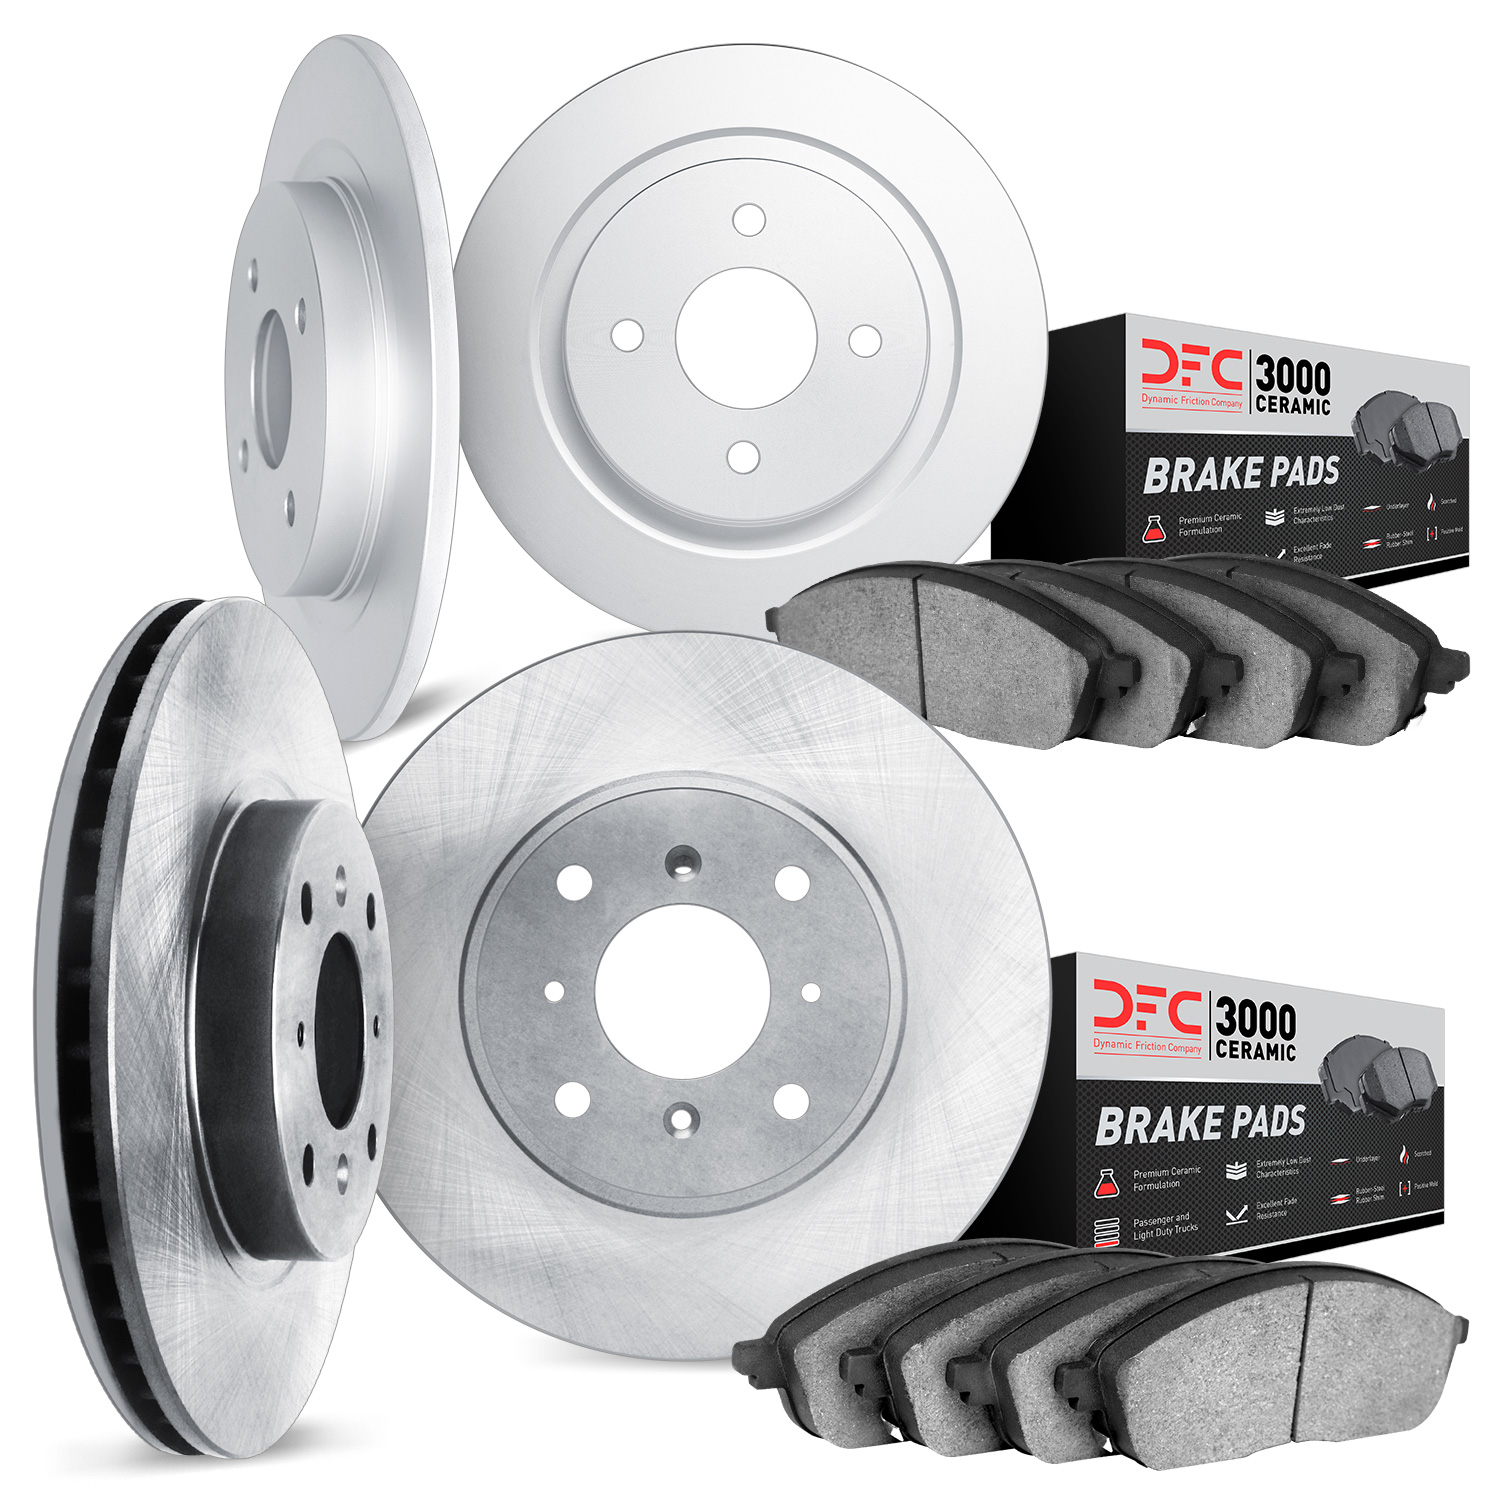 6304-01003 Brake Rotors with 3000-Series Ceramic Brake Pads Kit, 2004-2007 Multiple Makes/Models, Position: Front and Rear